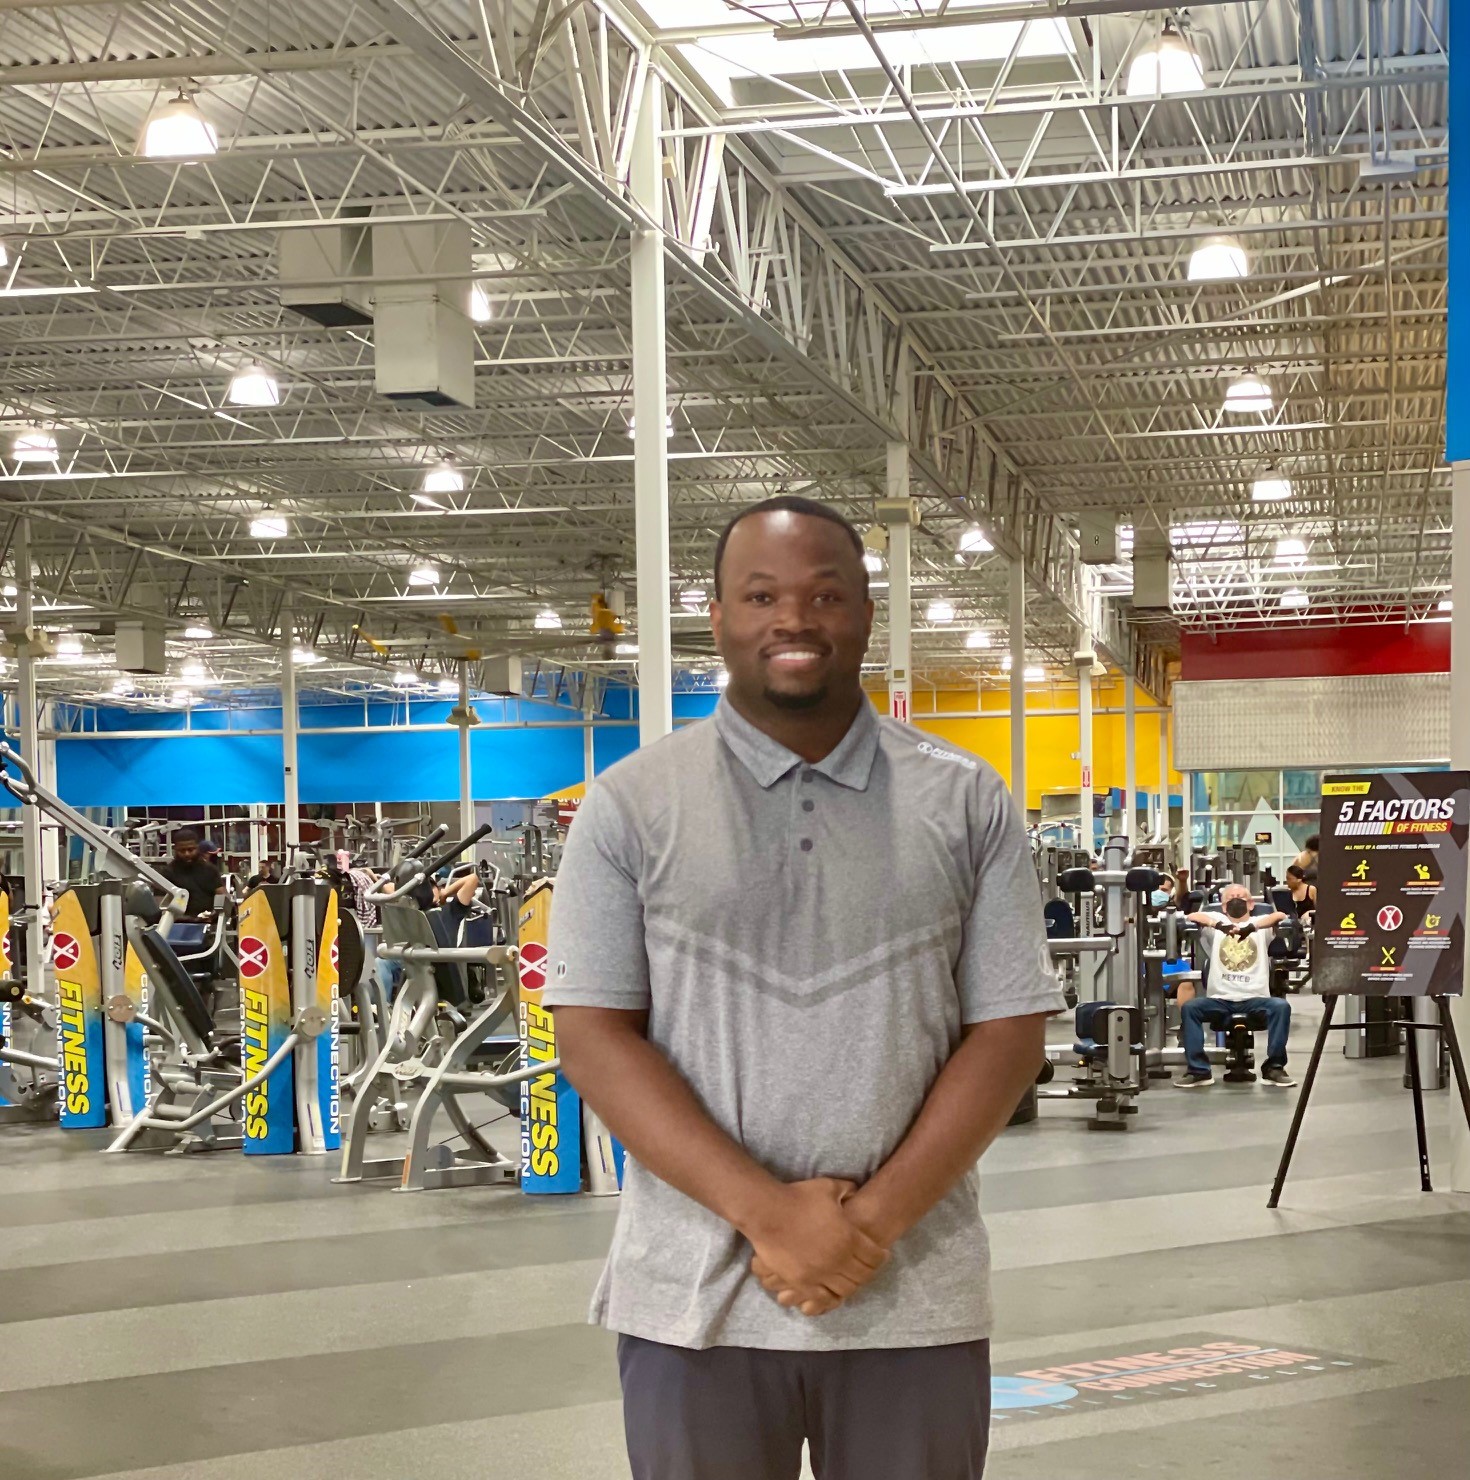 Monkarrio Murray is the Club Manager for Fitness Connection Pasadena